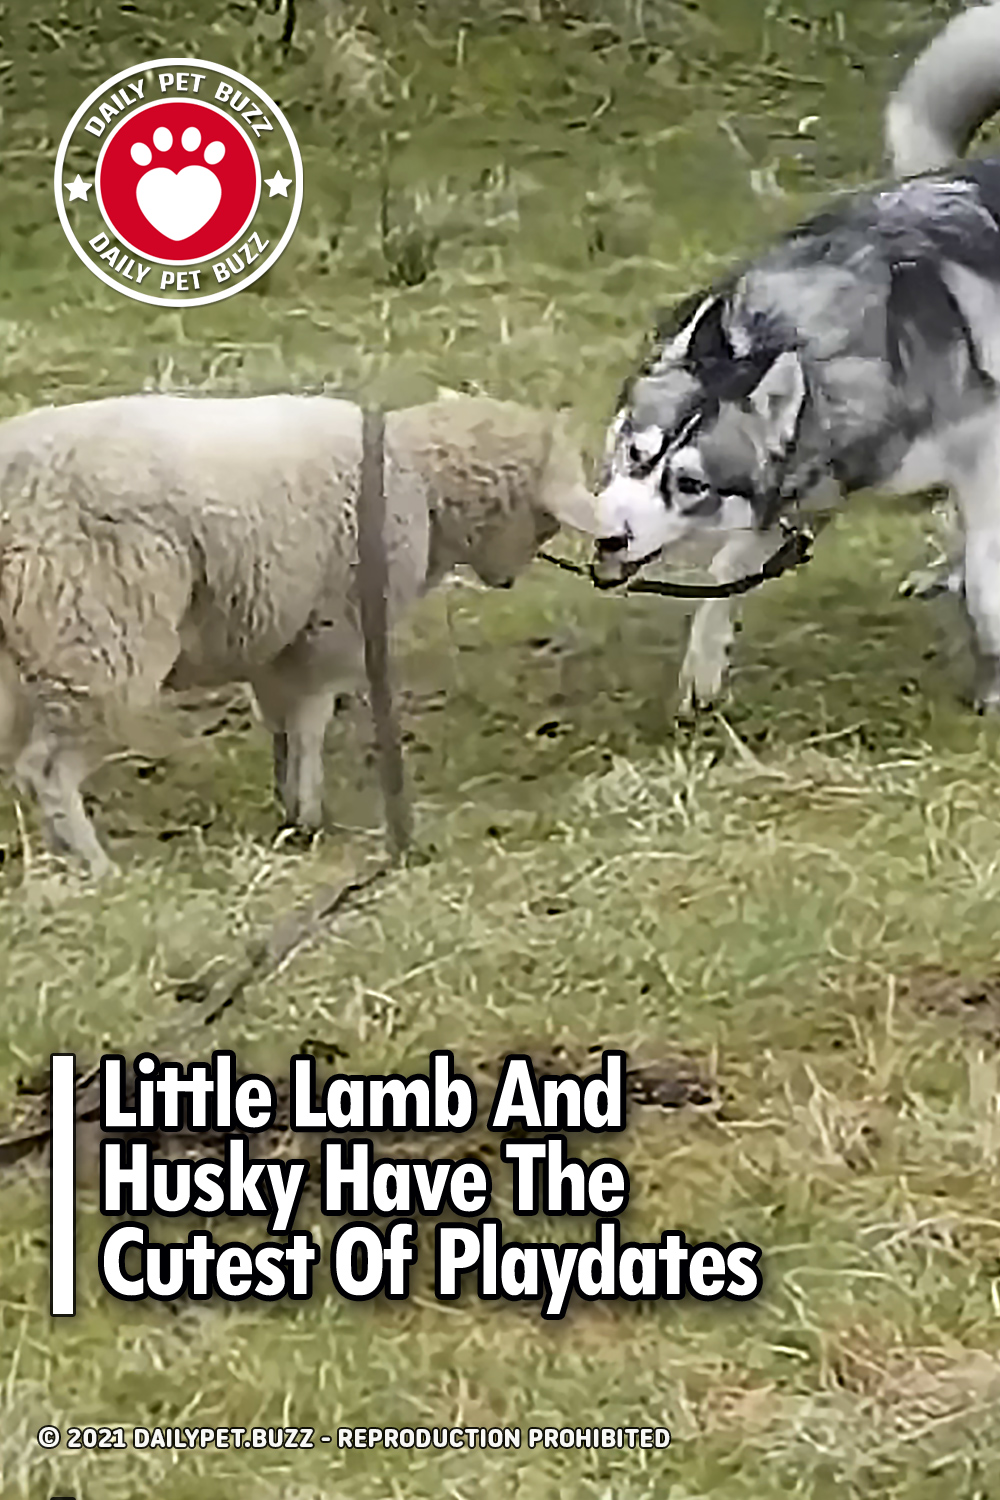 Little Lamb And Husky Have The Cutest Of Playdates